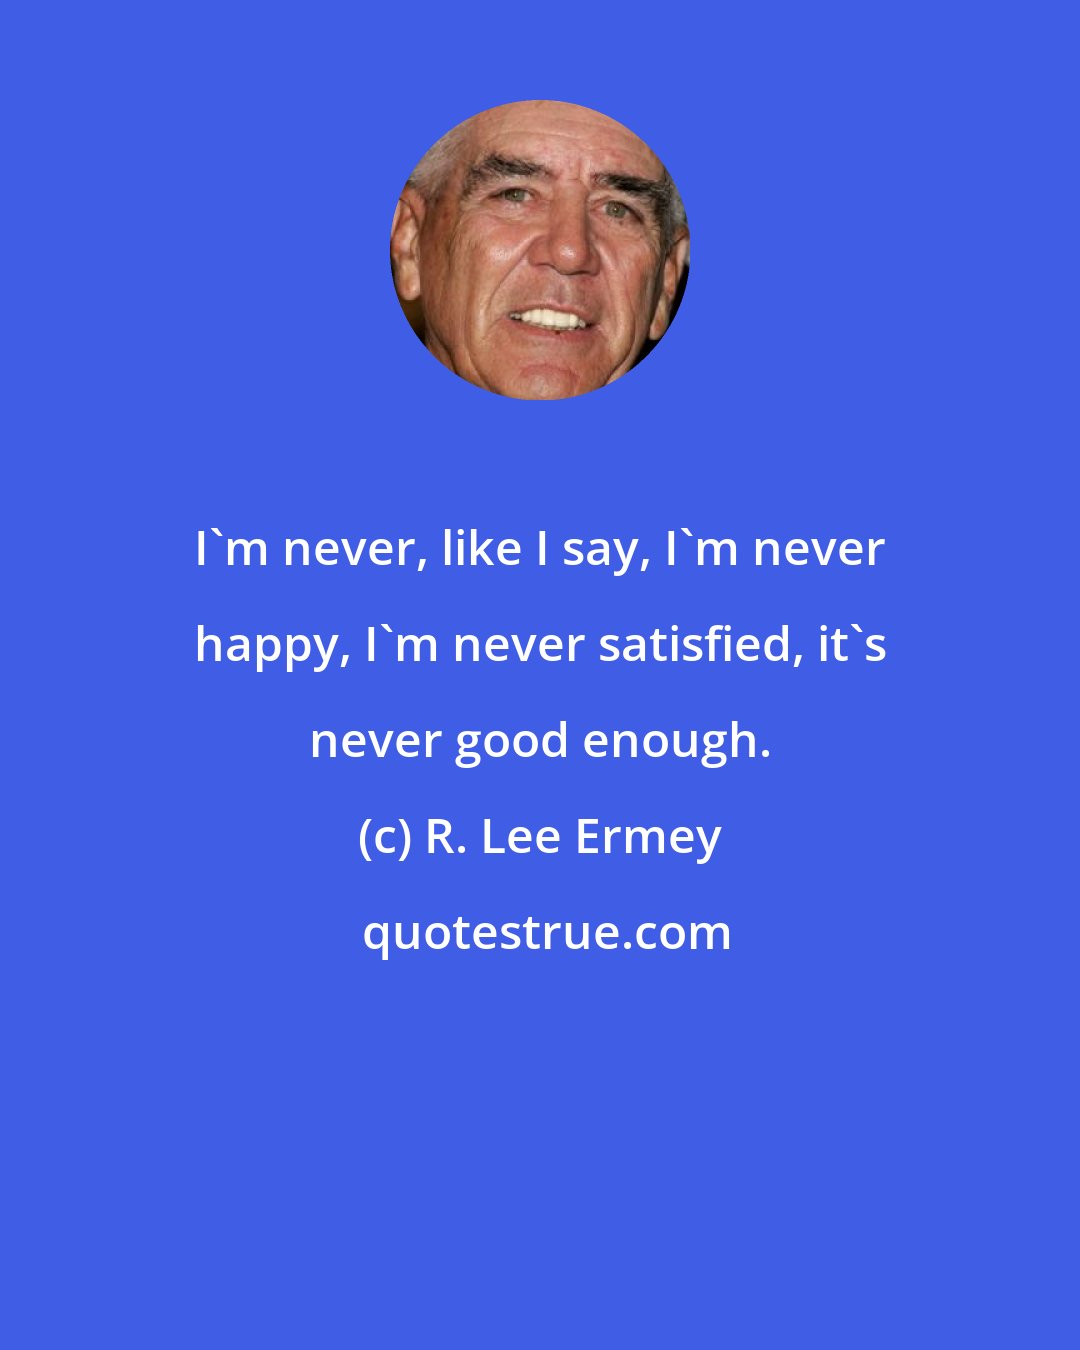 R. Lee Ermey: I'm never, like I say, I'm never happy, I'm never satisfied, it's never good enough.